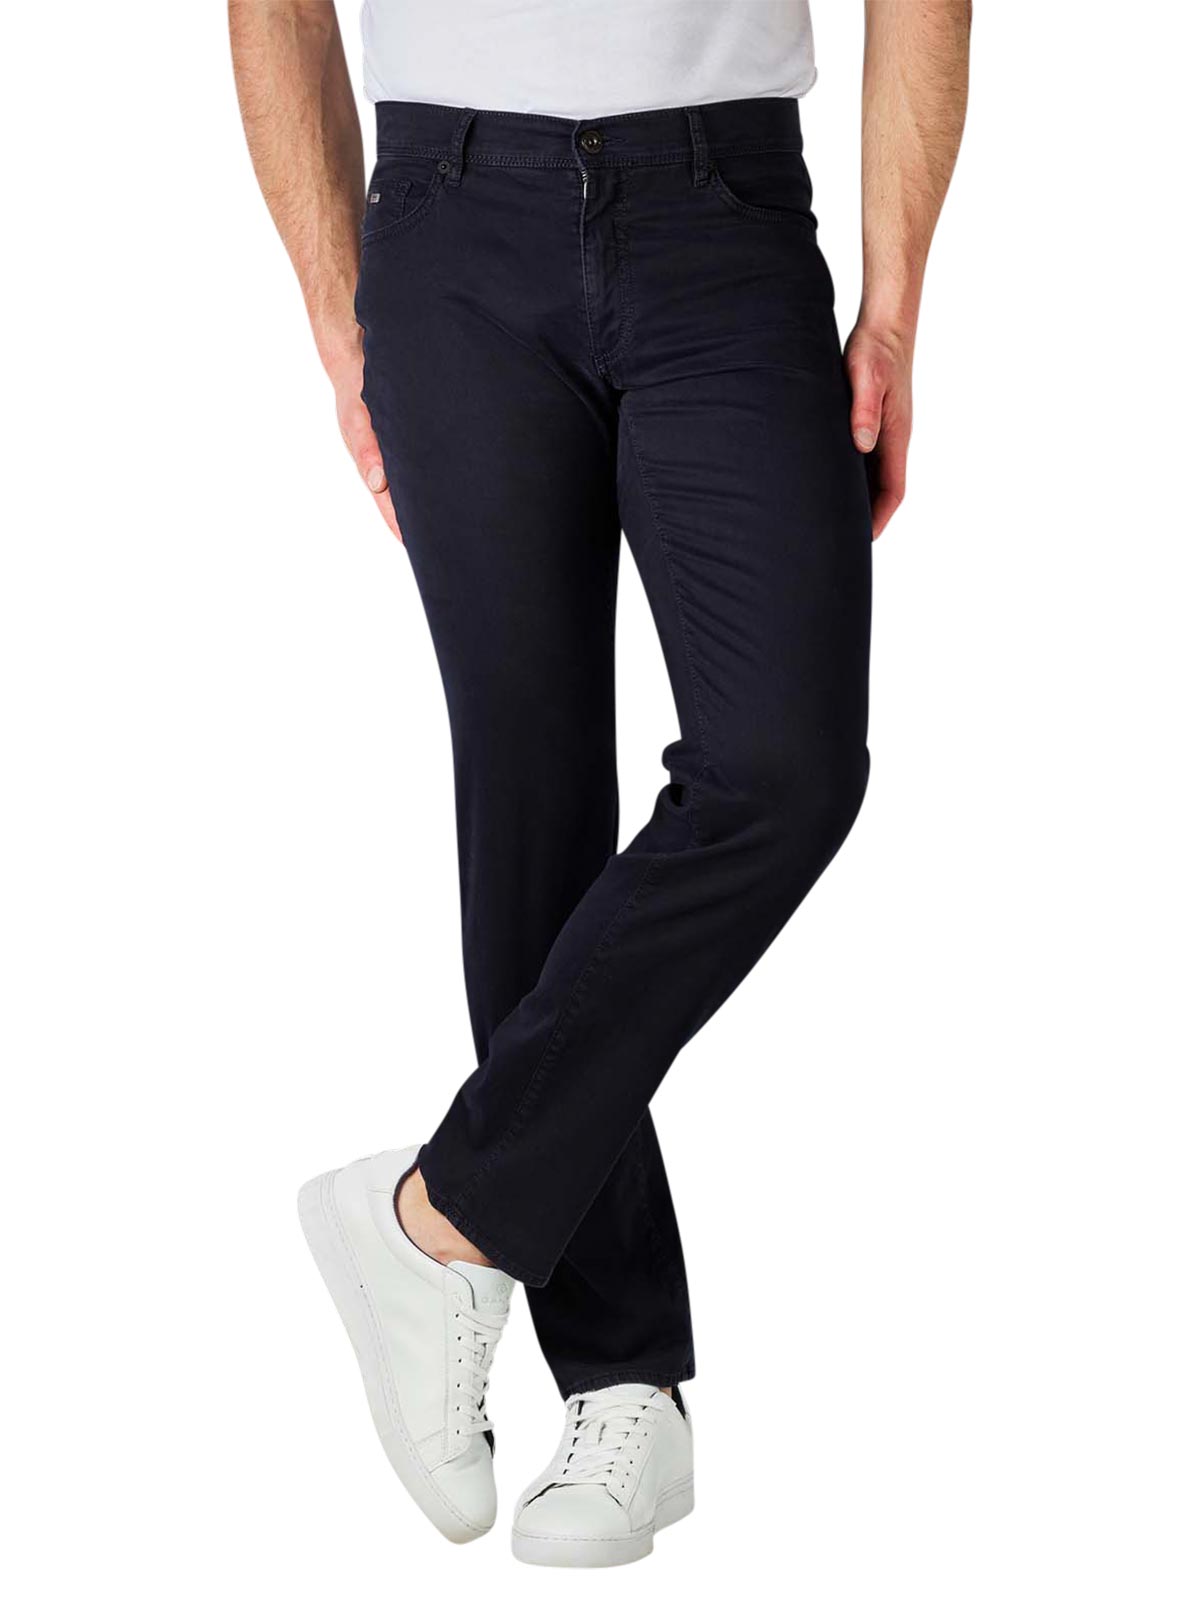 terugbetaling lezer Couscous Brax Cadiz (Cooper New) Jeans Straight perma blue Brax Men's Jeans | Free  Shipping on BEBASIC.CH - SIMPLY LOOK GOOD